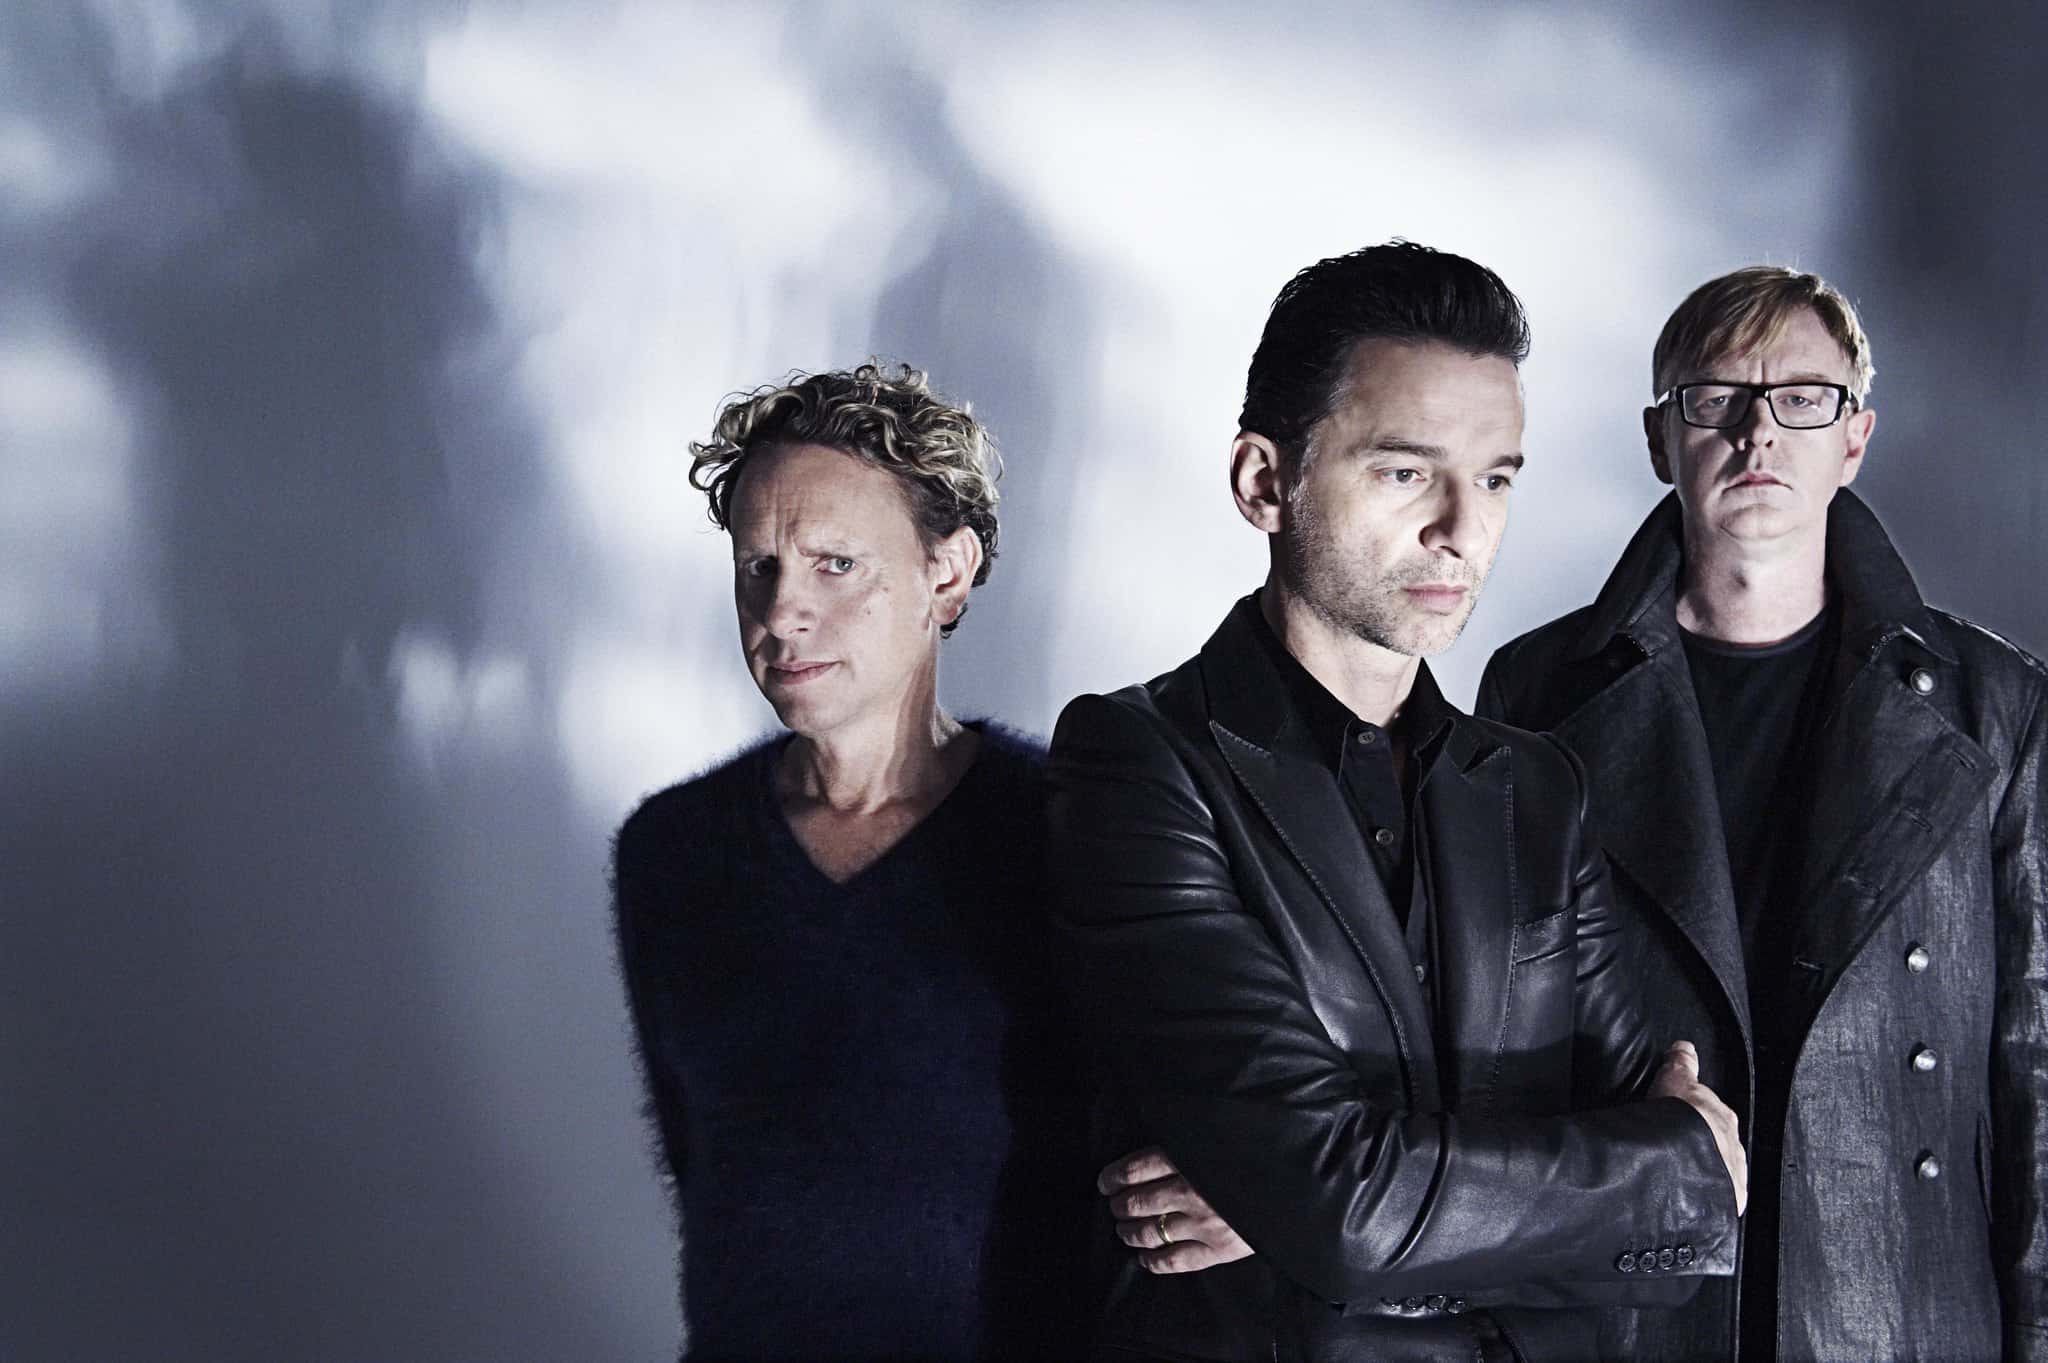 Depeche Mode 1997 album ‘Ultra’ sells for $2,400 on Discogs